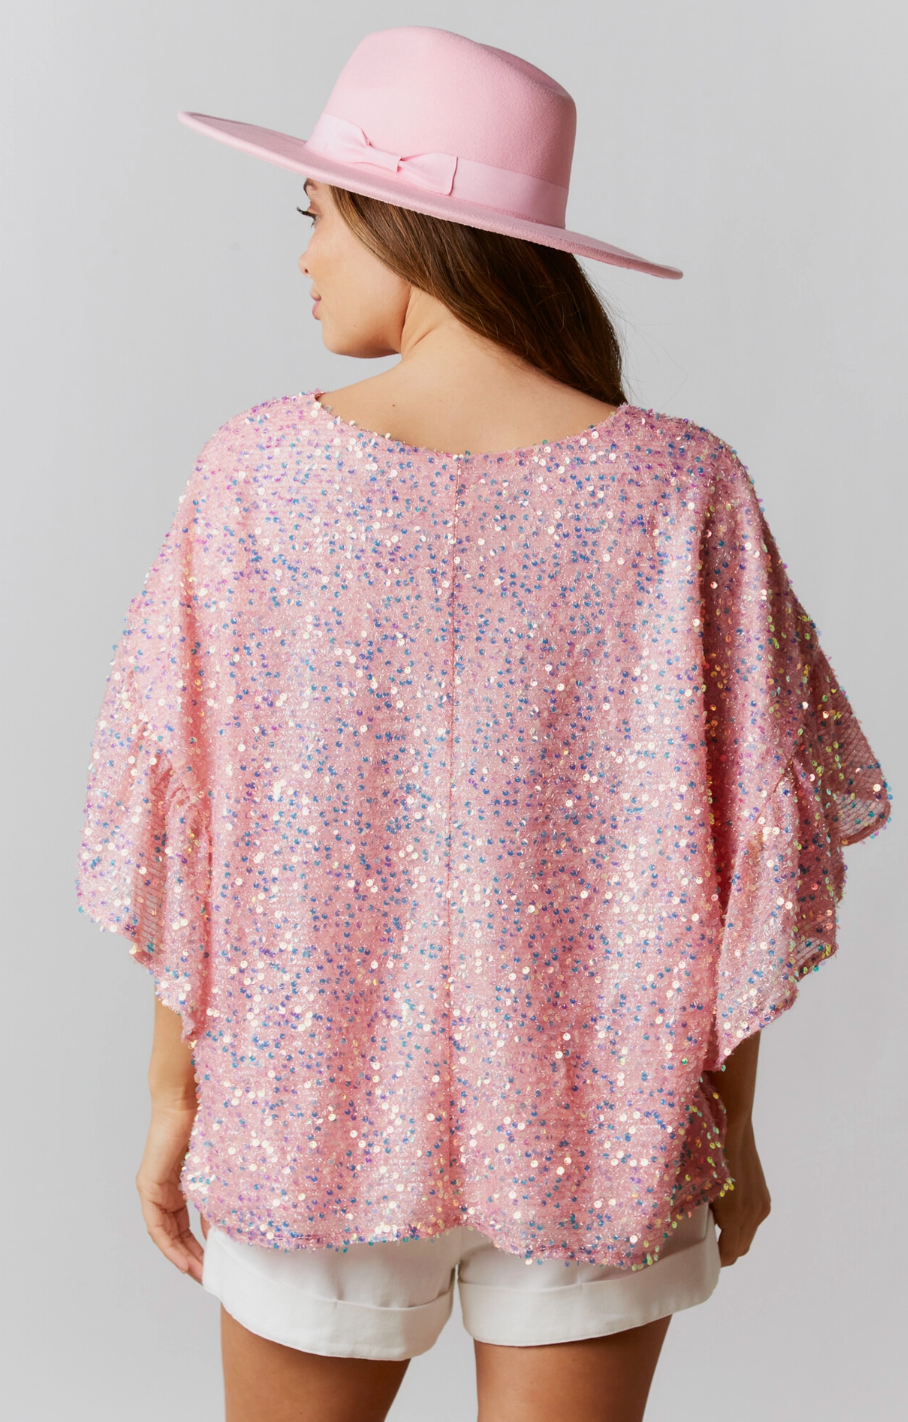 Go All Out Pink Sequin Top